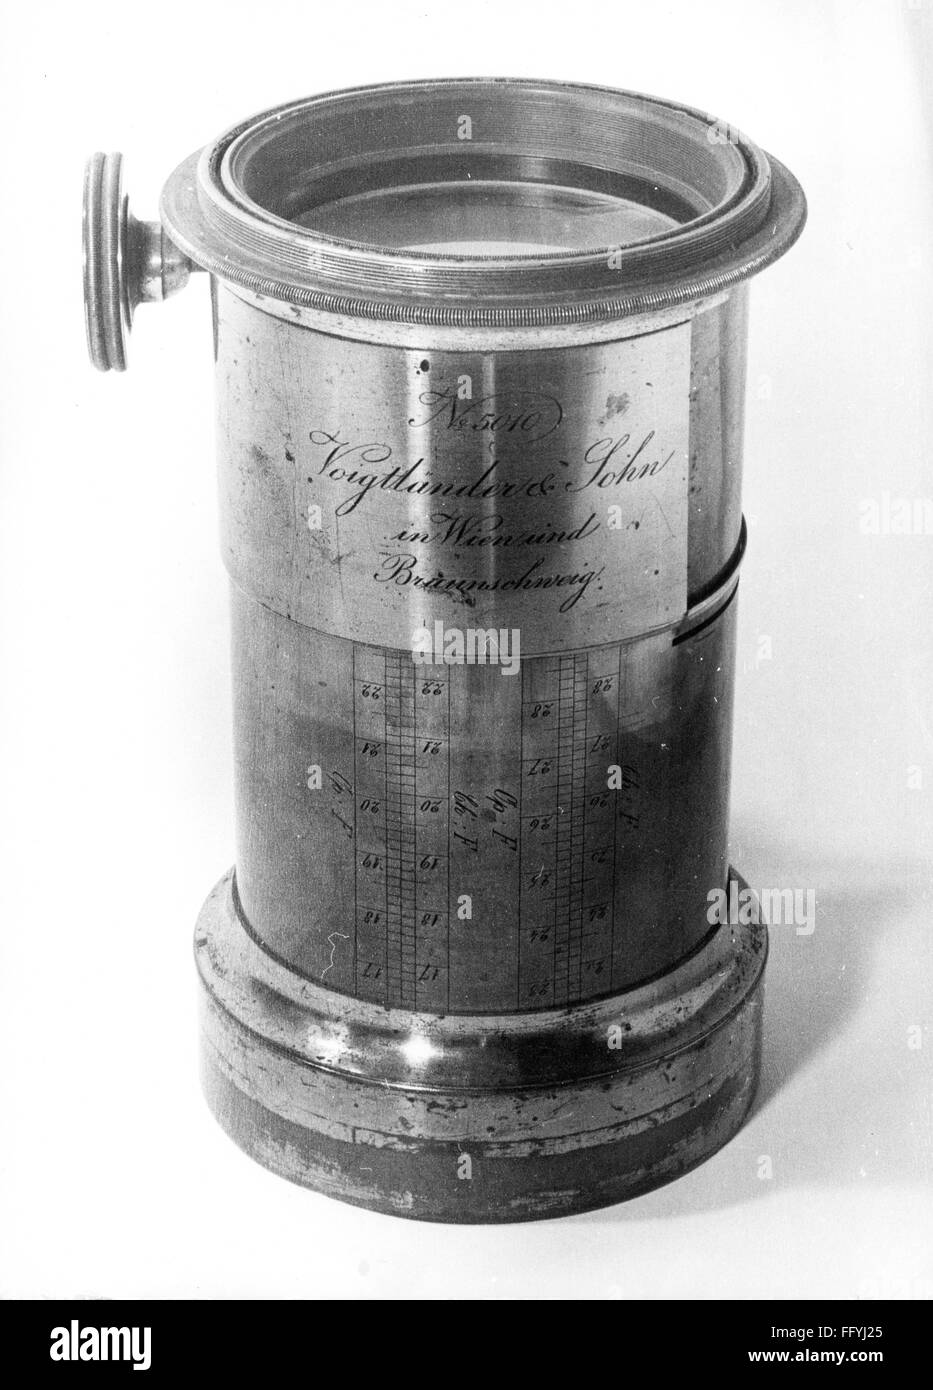 photography, cameras, camera lens Nr. 5010 by Voigtländer & Sohn, Vienna - Braunschweig, 19th century, photographic collection, municipal museum, Munich, 19th century, optics, lens, objective, lenses, objectives, object, objects, stills, Petzvalobjektiv, photo camera, cameras, camera, historic, historical, Voigtlaender, Voigtländer, Voigtlander, Additional-Rights-Clearences-Not Available Stock Photo